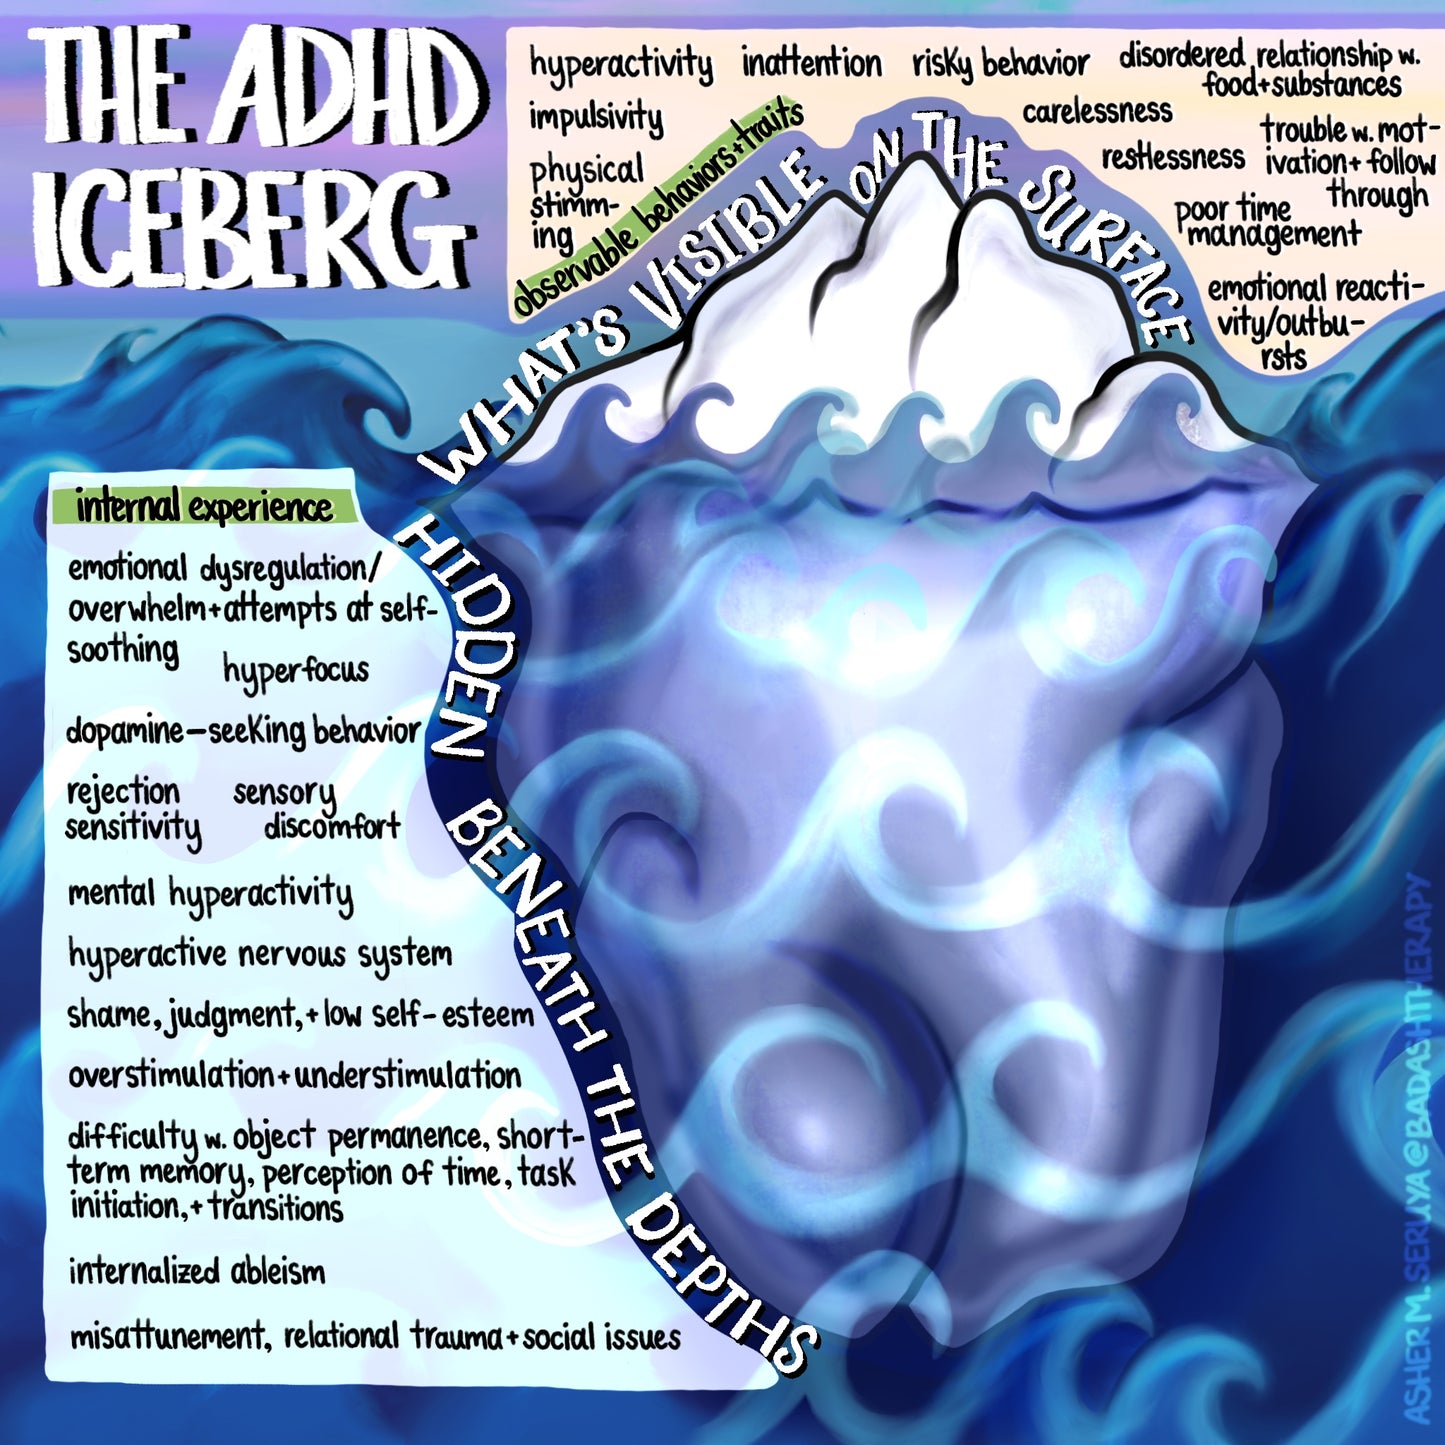 The ADHD Iceberg - Illustrated Infographic